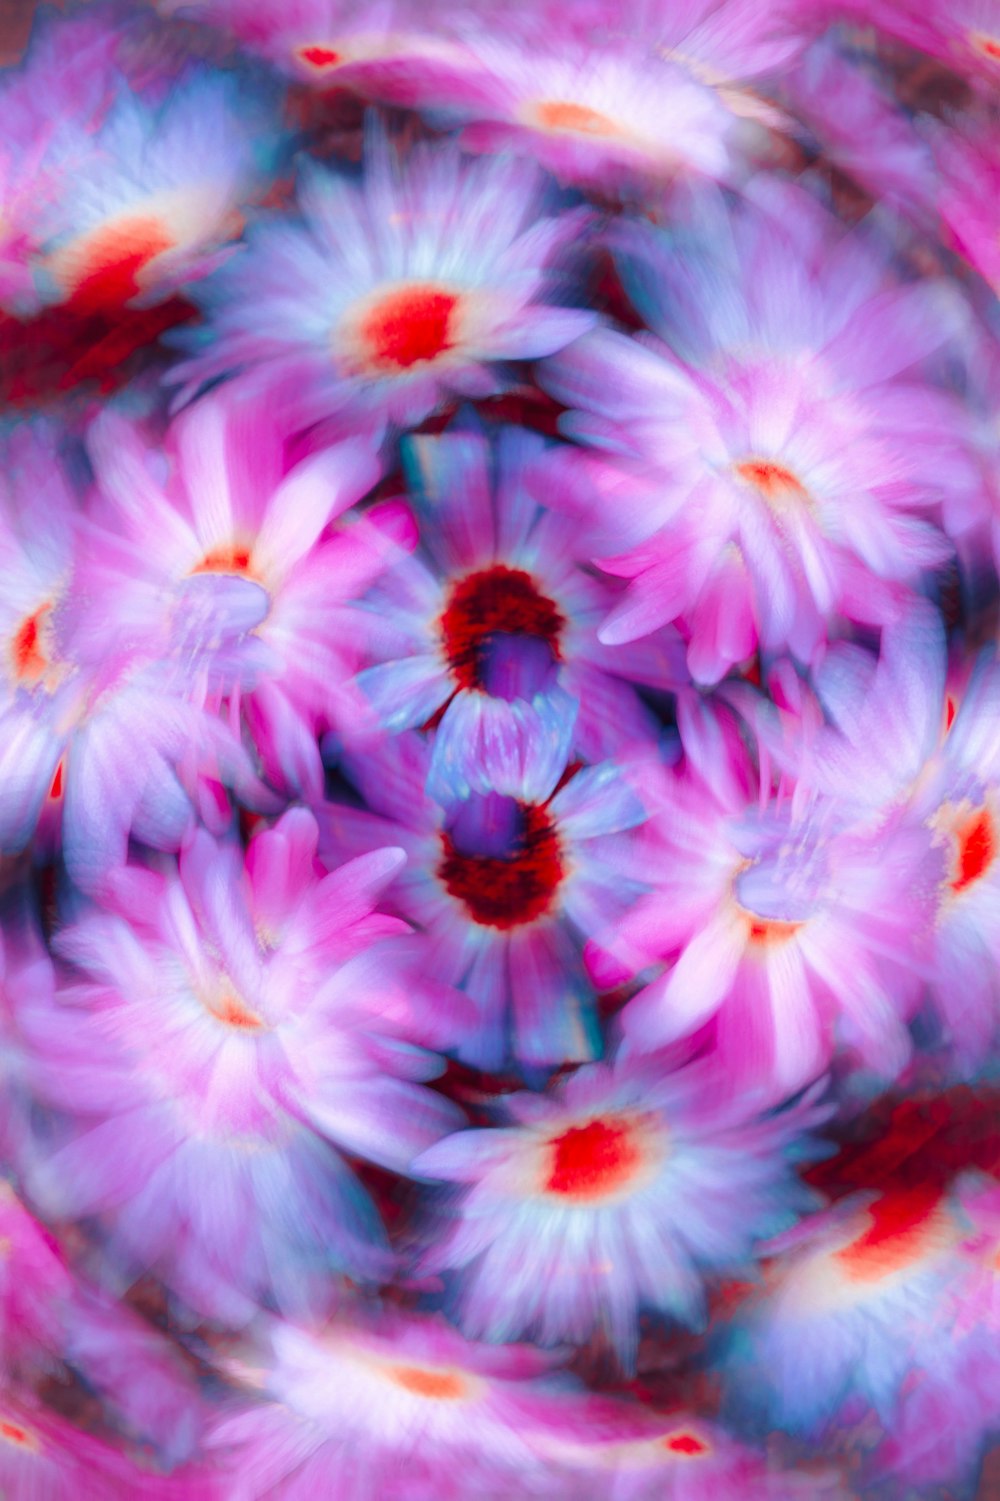 a circular image of pink and white flowers